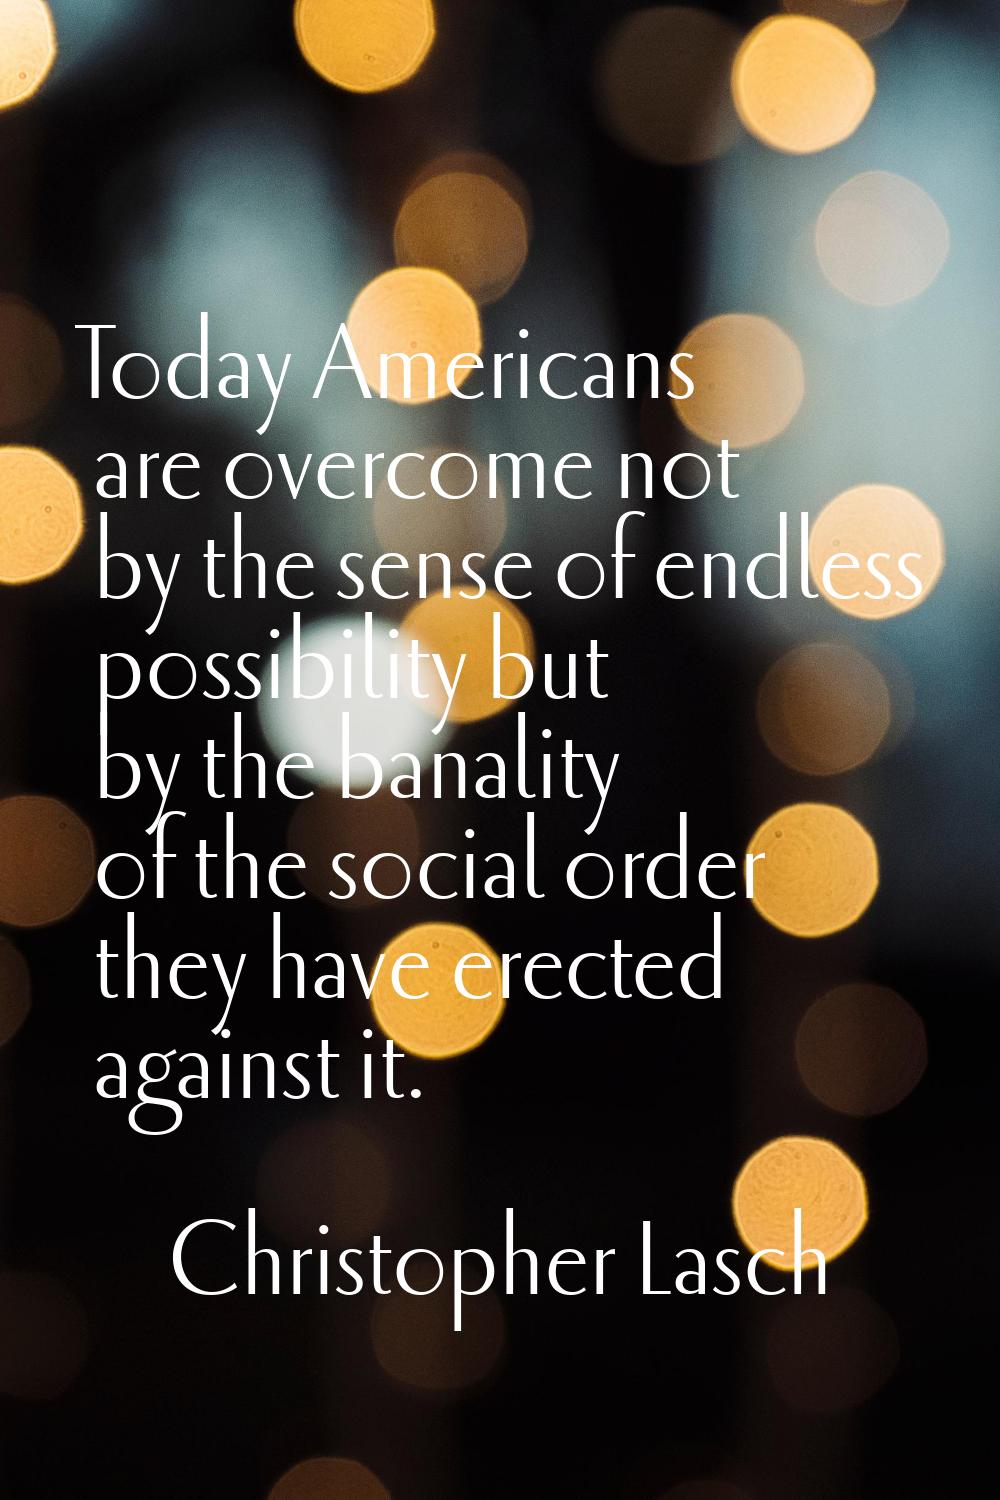 Today Americans are overcome not by the sense of endless possibility but by the banality of the soc